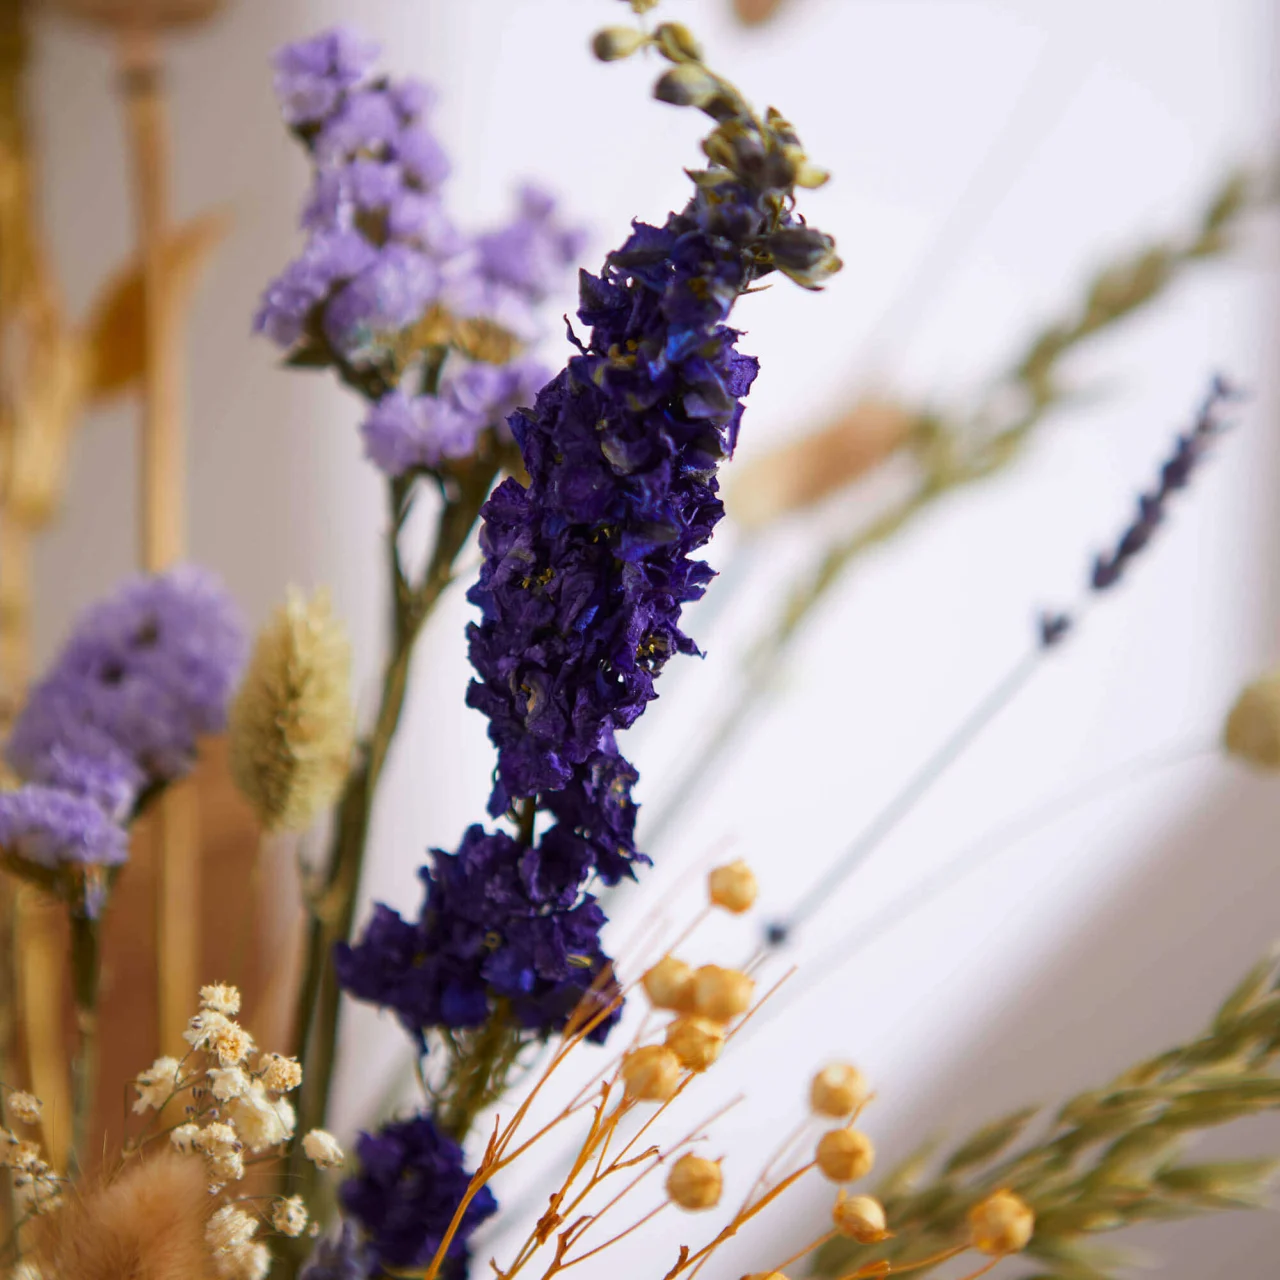 How to dry flowers, Blog